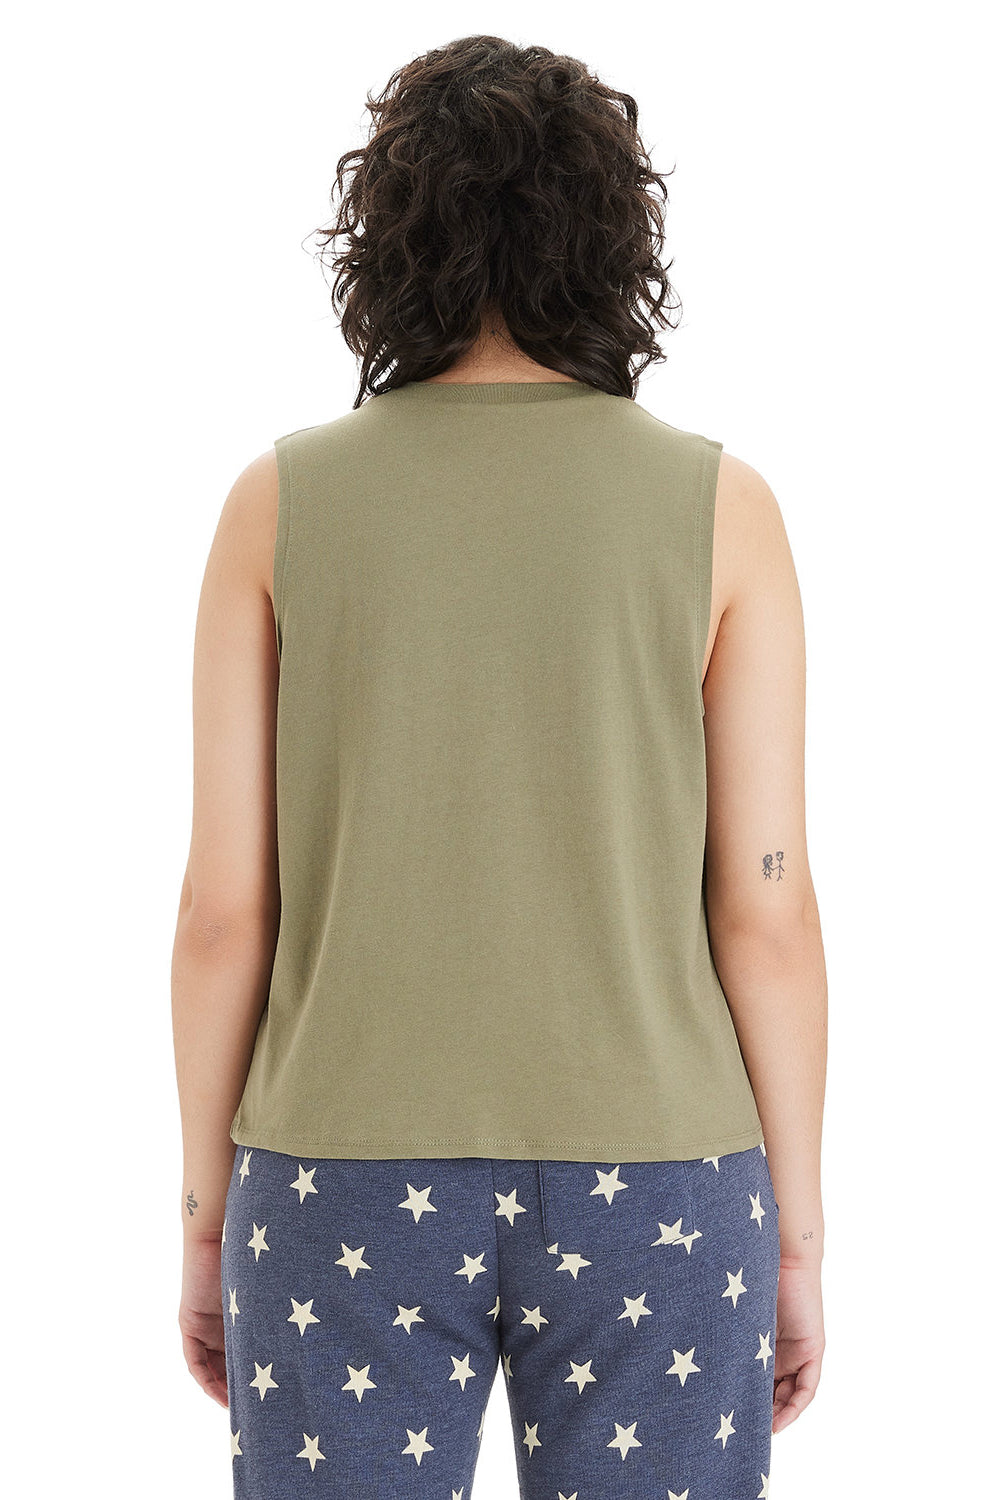 Alternative 1174 Womens Go To Crop Muscle Tank Top Military Green Model Back